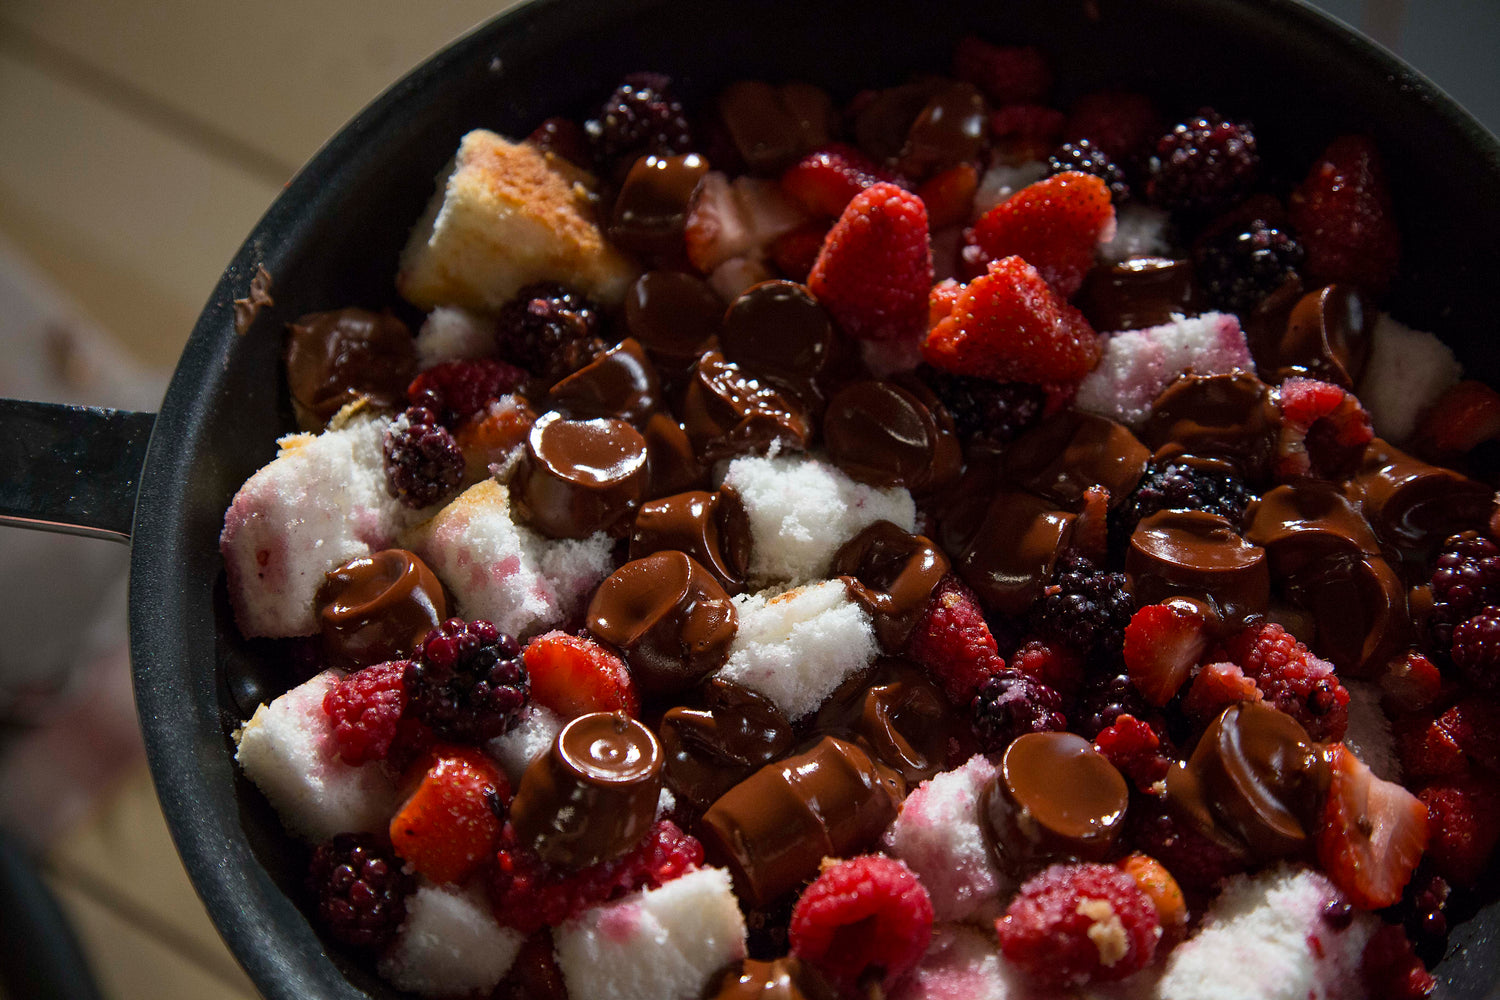 #HikerChat Quick Tip: Chocolate Fruity Gooey Goodness